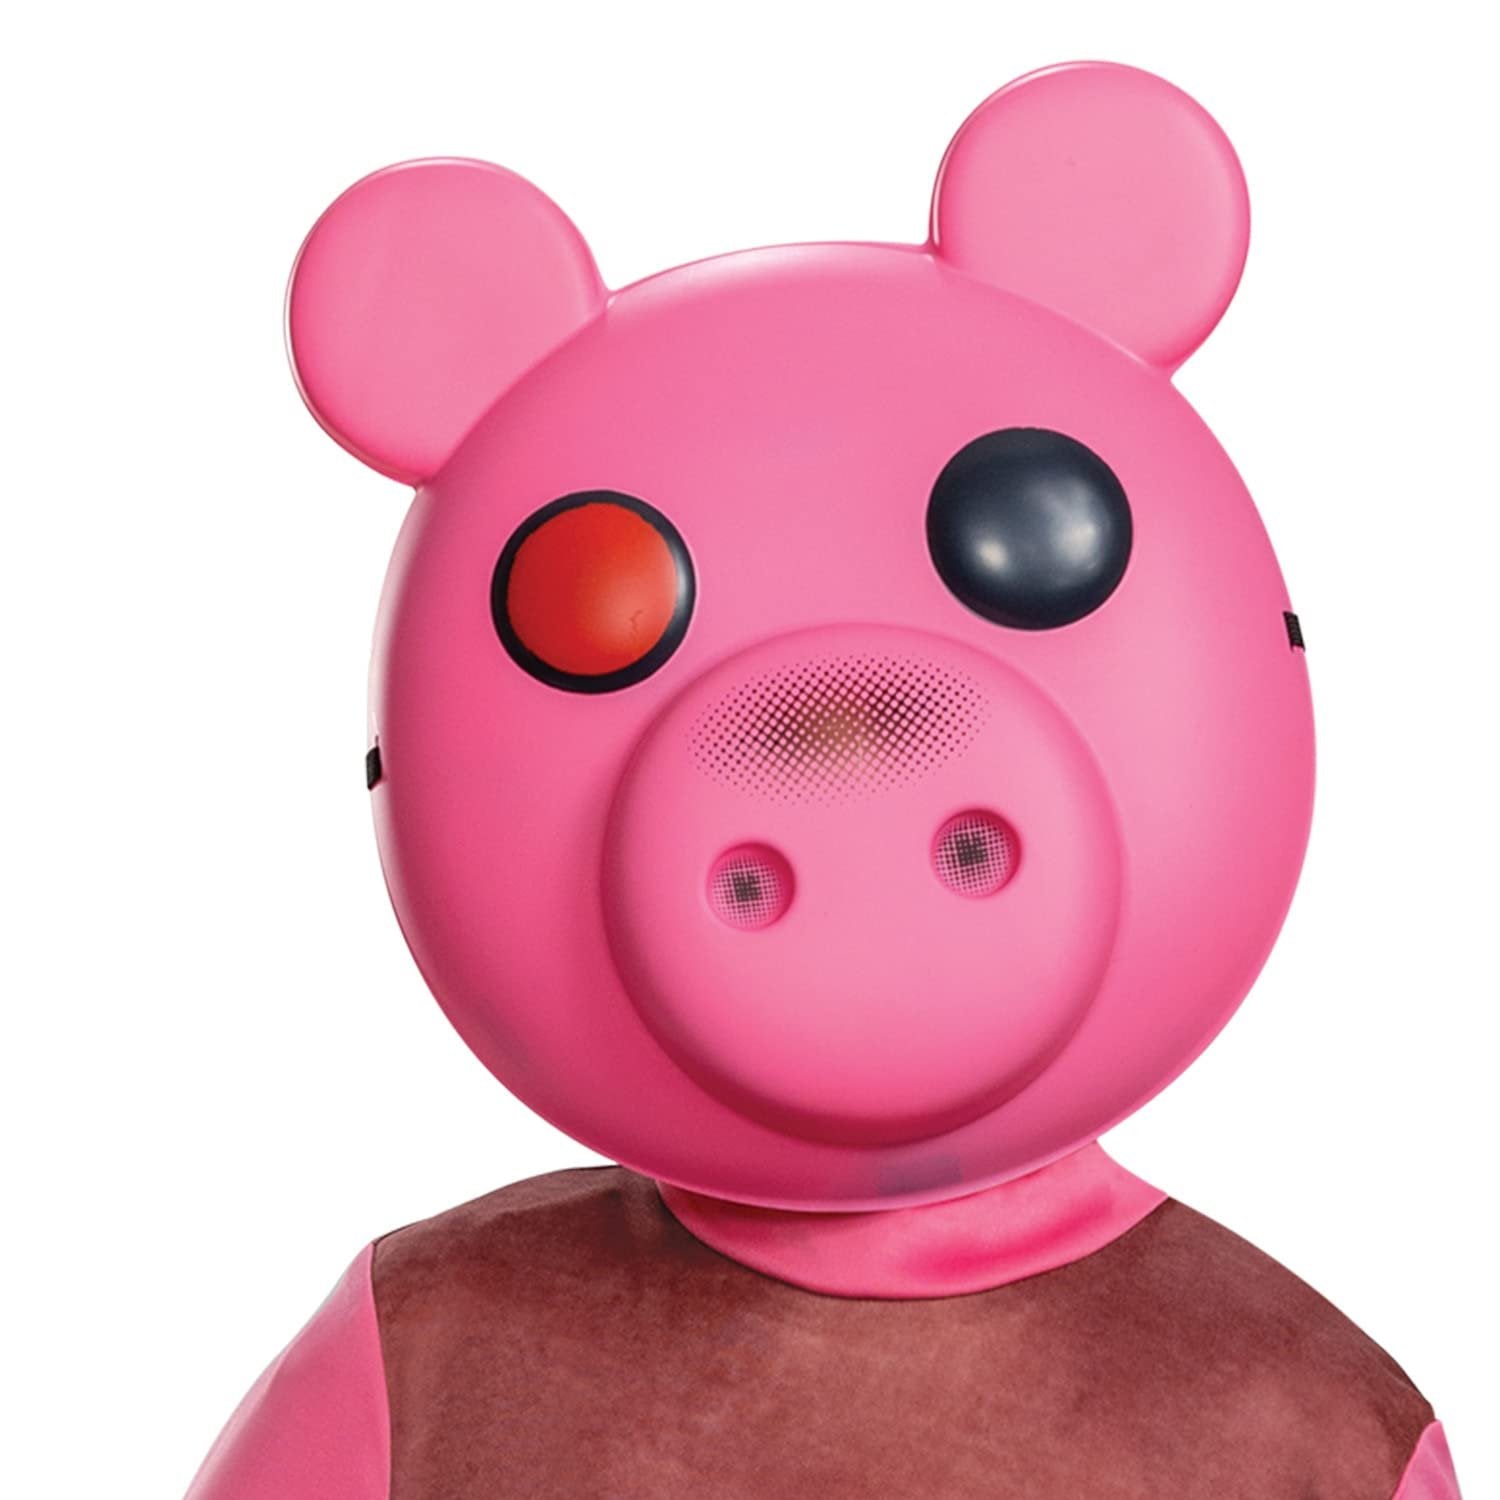 Piggy Costume for Kids, Official Piggy Video Game Costume Outfit and Mask, Size (10-12)